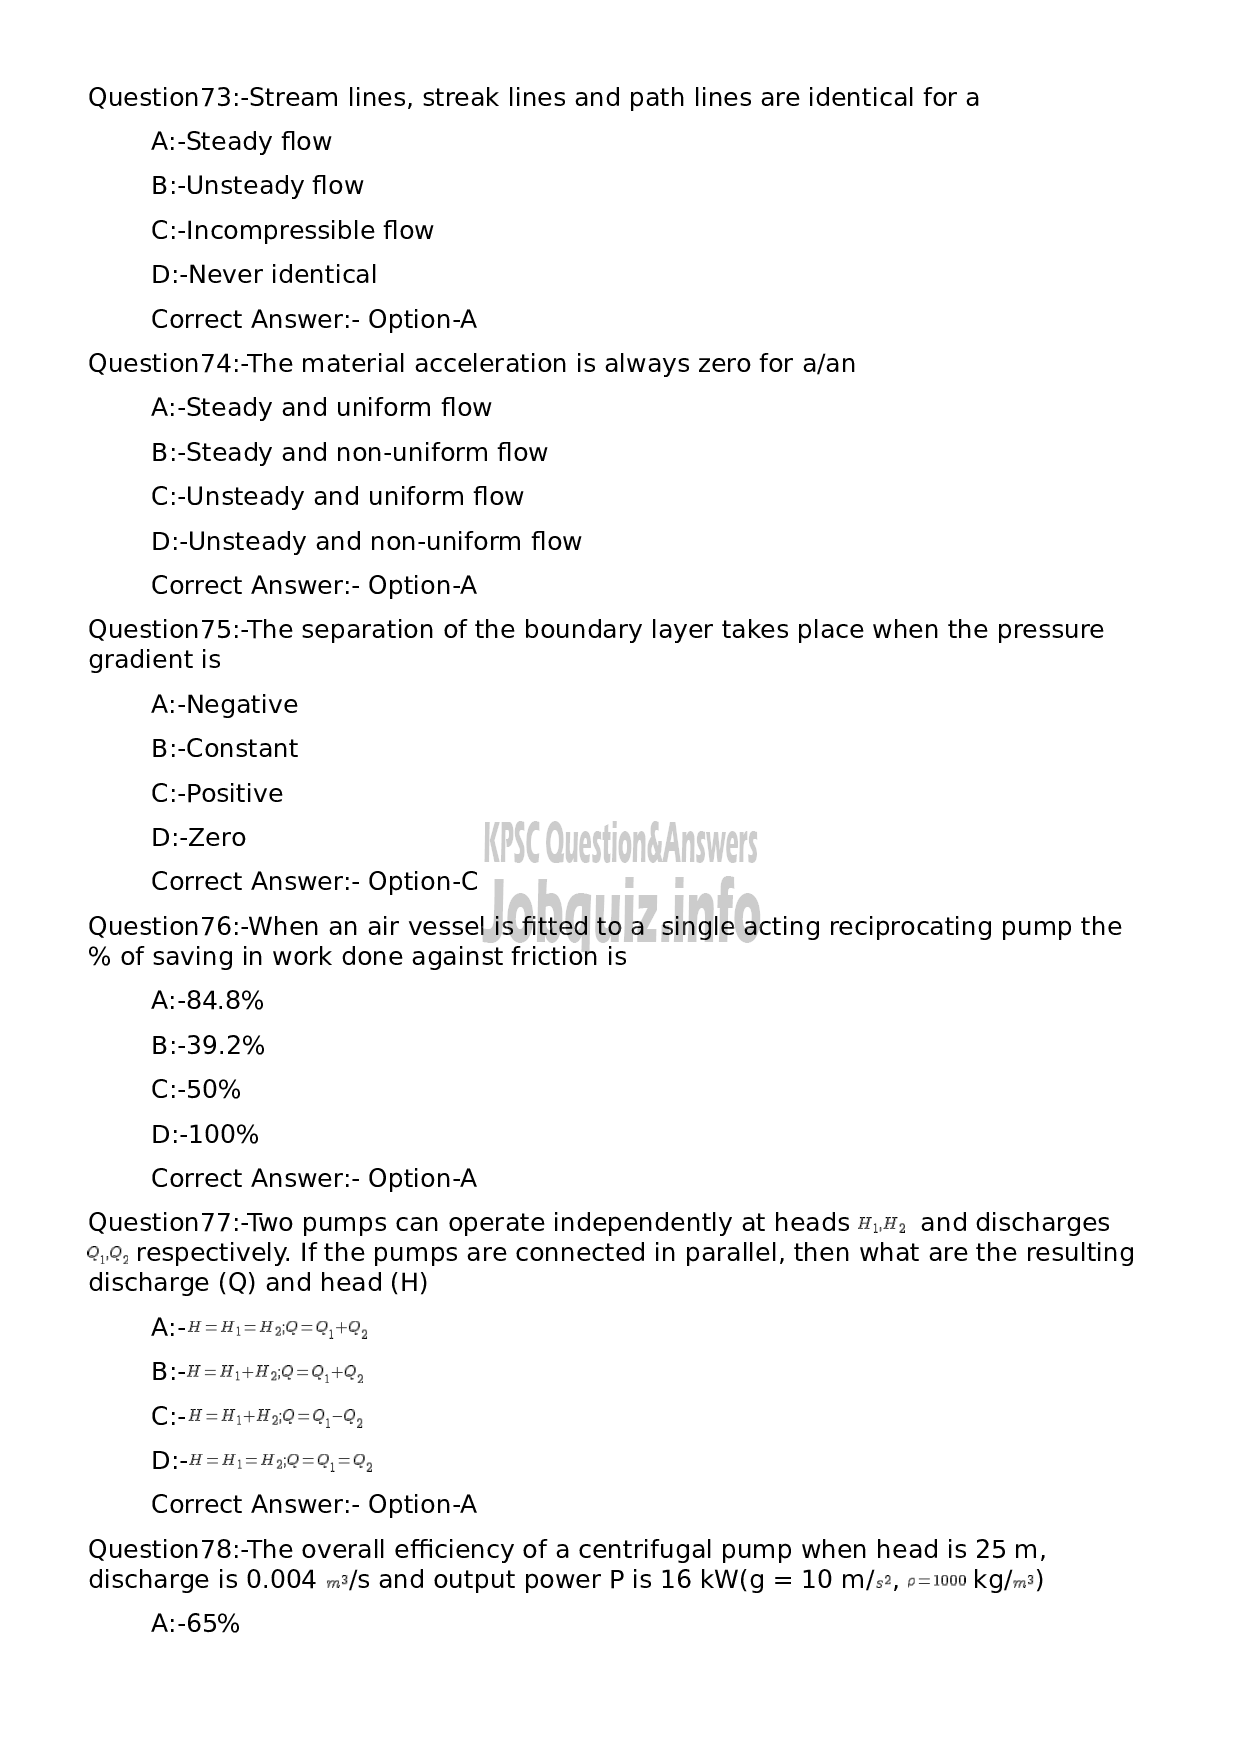 Kerala PSC Question Paper - Assistant Engineer (Agriculture) - Agriculture Development and Farmers Welfare-15